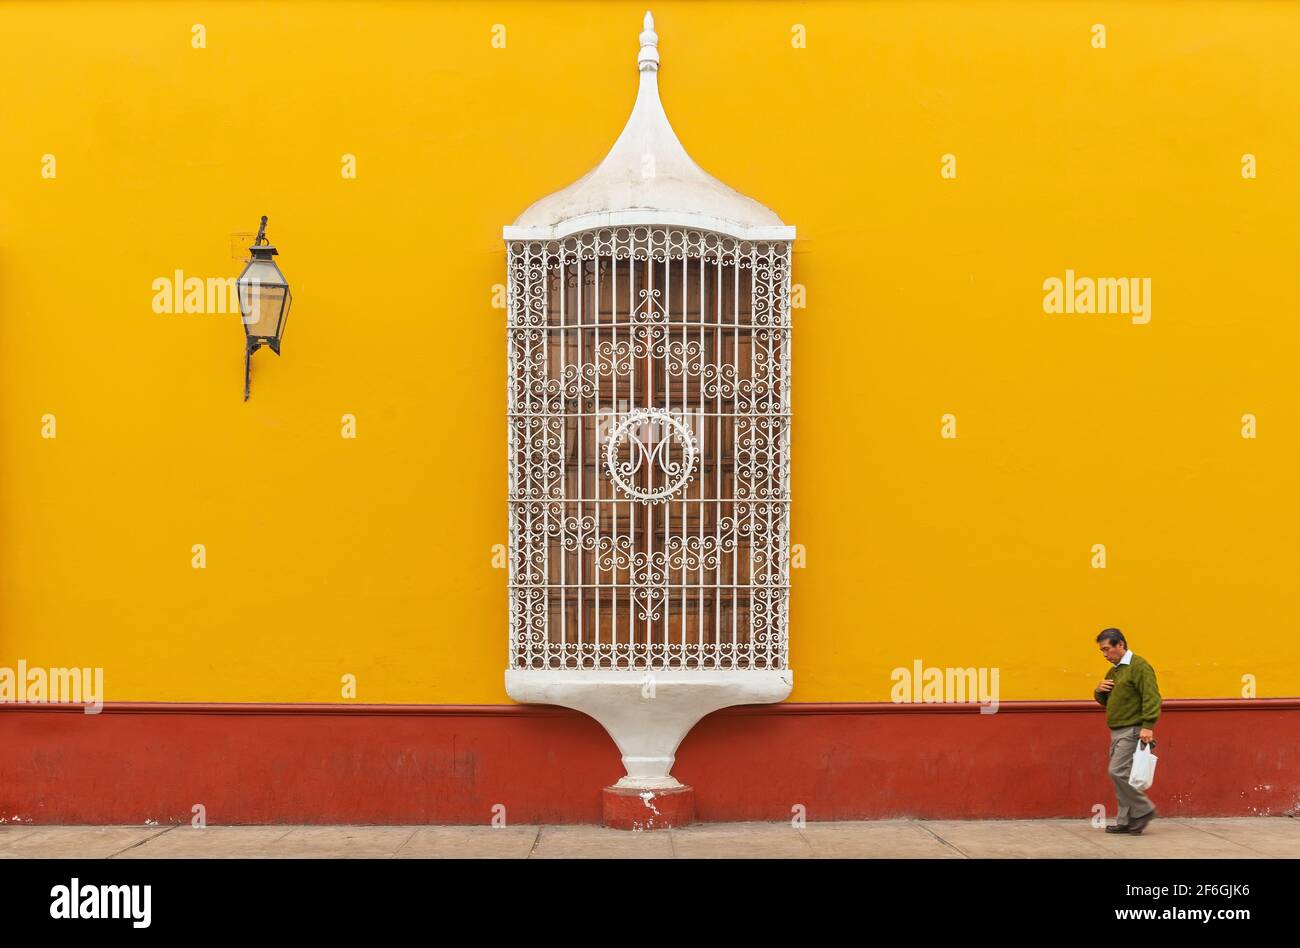 Senior peruvian man walking with blurred motion in front of a colonial style facade with window, Trujillo, Peru. Stock Photo